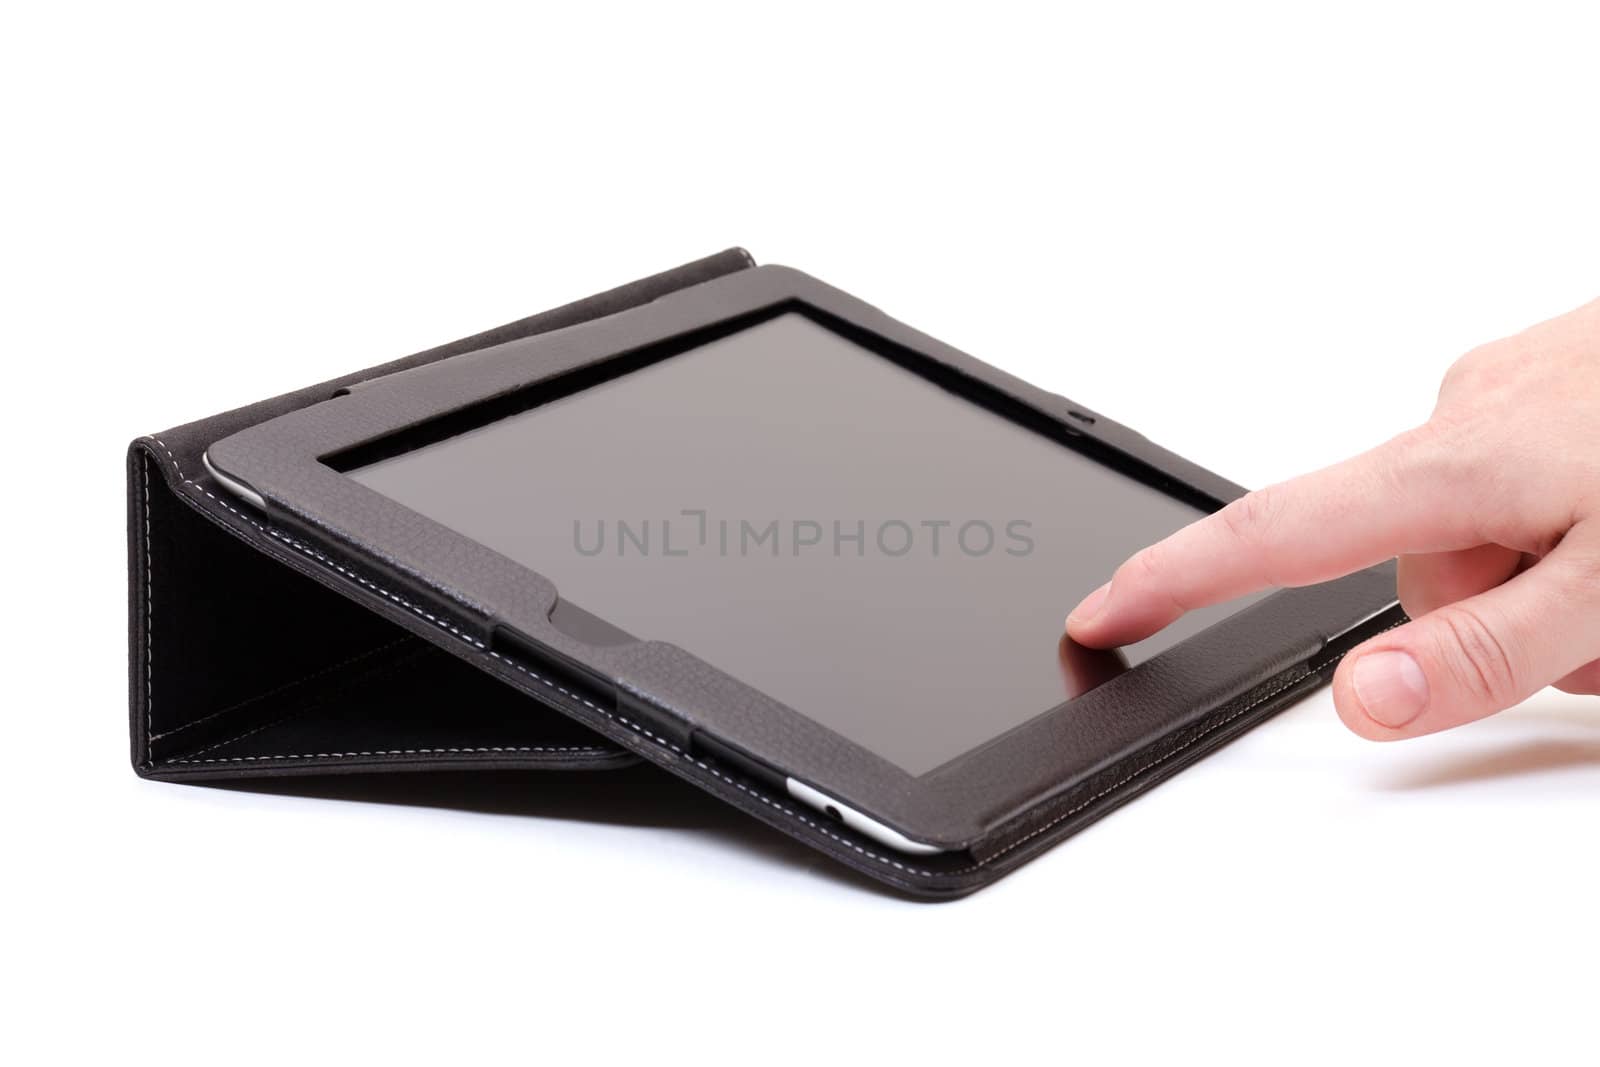 hands with touch pad on white background